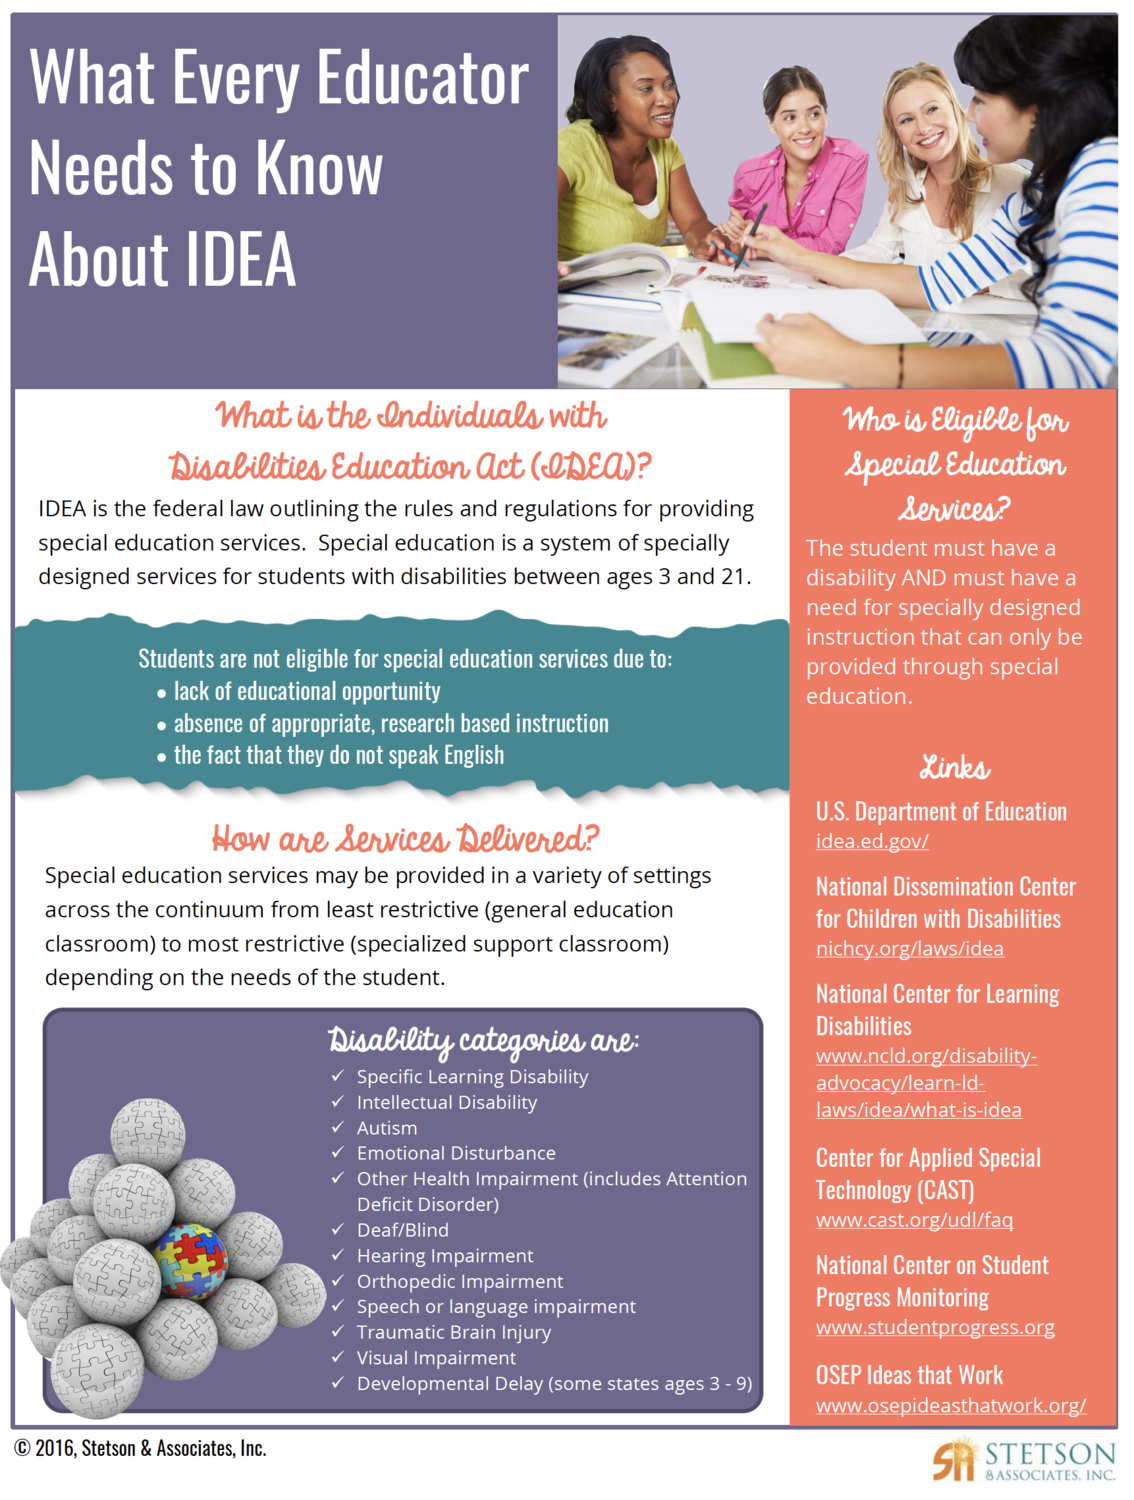 What Every Educator Needs to Know About IDEA Information Card